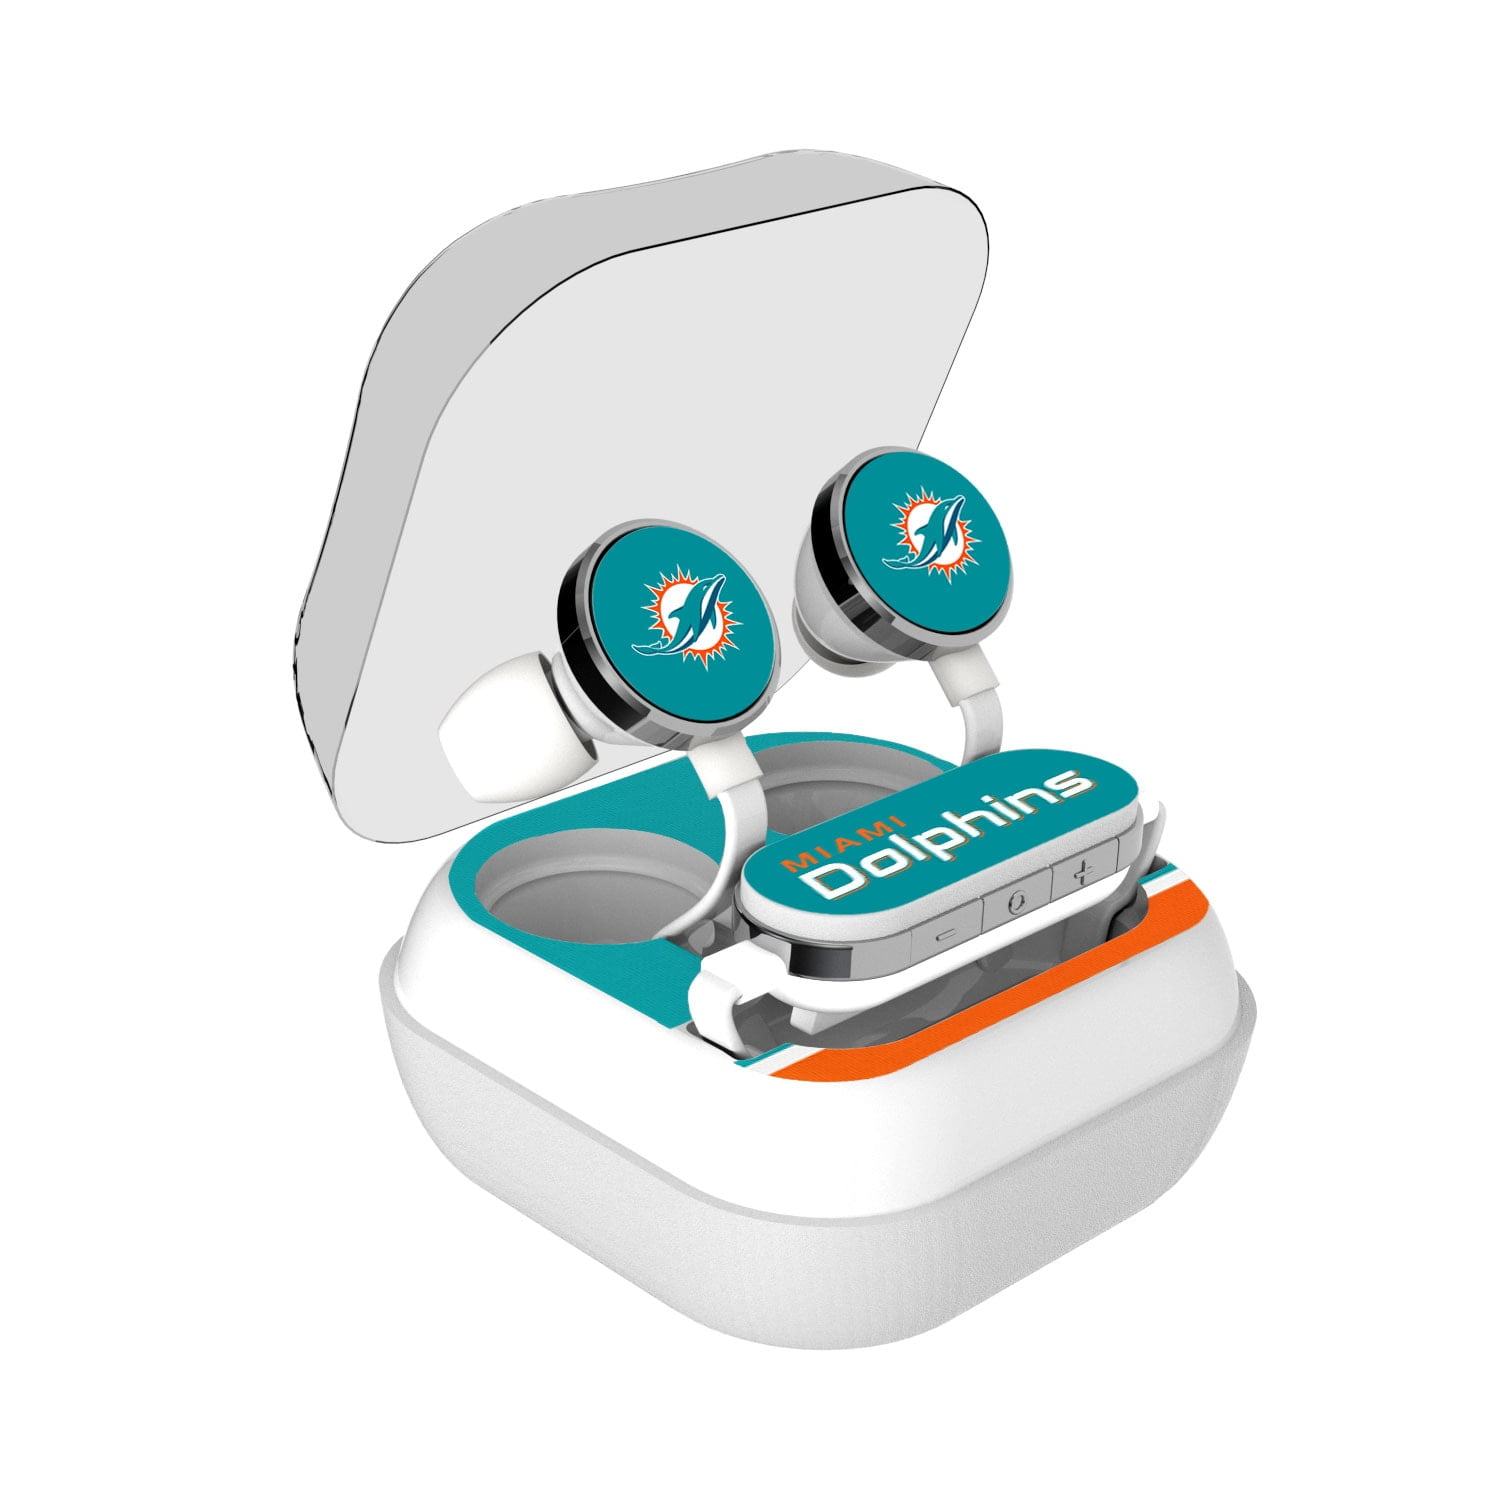 Strategic Printing Miami Dolphins Wireless Charger and Mouse Pad 